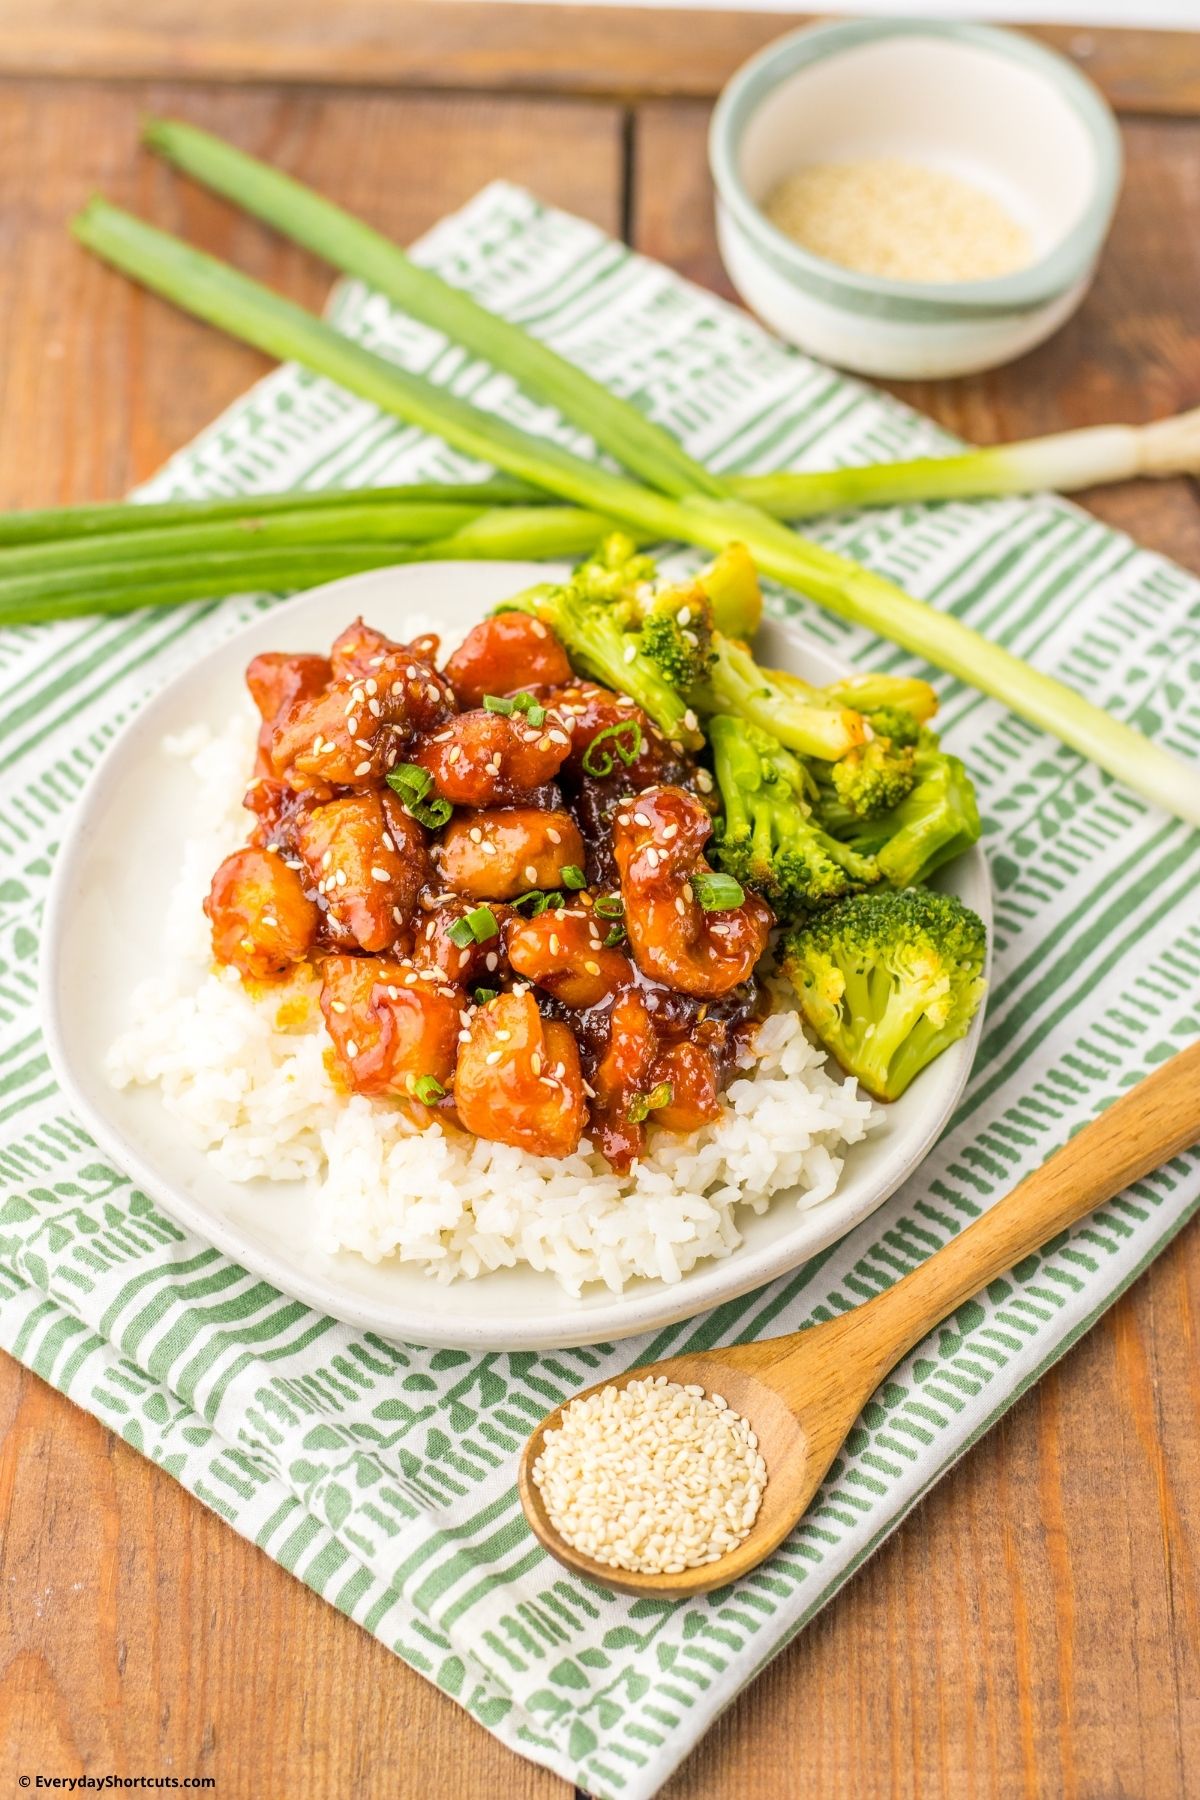 mall food court bourbon chicken with broccoli